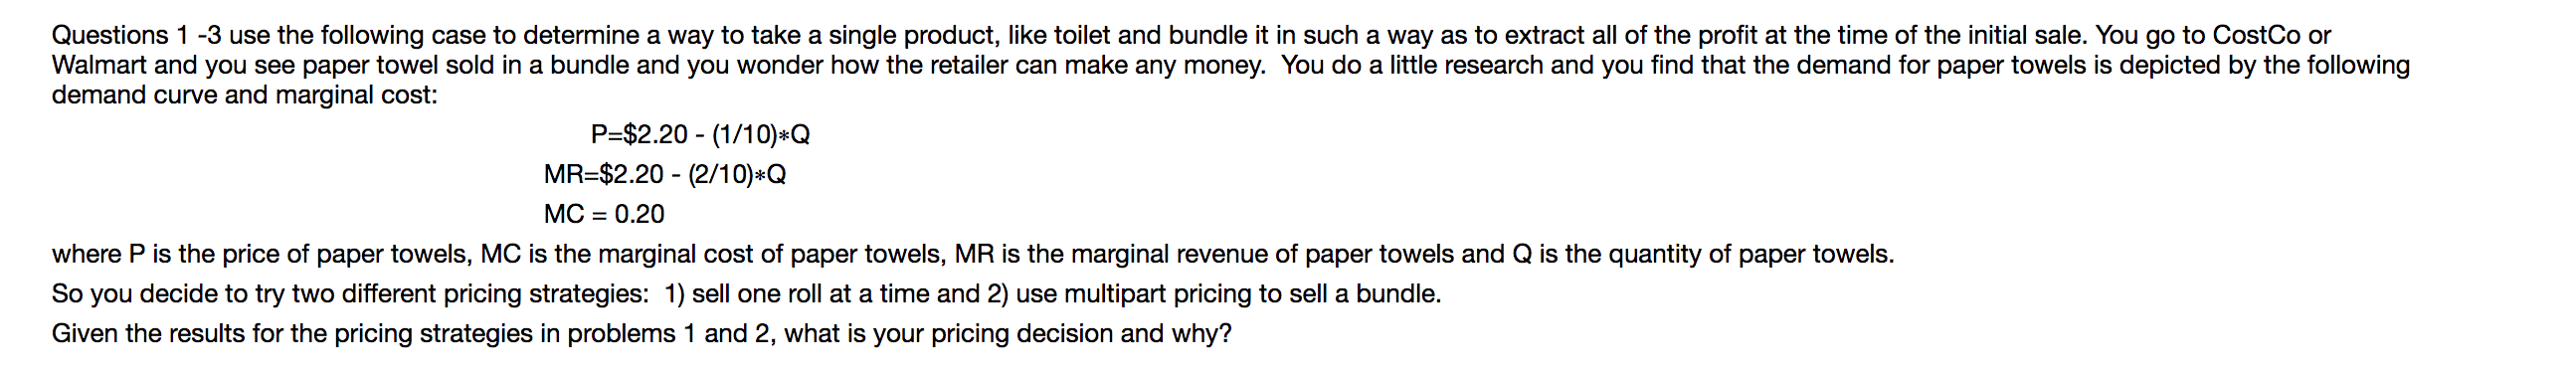 Questions 1-3 use the following case to determine a way to take a single product, like toilet and bundle it in such a way as to extract all of the profit at the time of the initial sale. You go to CostCo or
Walmart and you see paper towel sold in a bundle and you wonder how the retailer can make any money. You do a little research and you find that the demand for paper towels is depicted by the following
demand curve and marginal cost:
P=$2.20 (1/10)*Q
MR-$2.20 (2/10)*Q
MC 0.20
where P is the price of paper towels, MC is the marginal cost of paper towels, MR is the marginal revenue of paper towels and Q is the quantity of paper towels.
So you decide to try two different pricing strategies: 1) sell one roll at a time and 2) use multipart pricing to sell a bundle.
Given the results for the pricing strategies in problems 1 and 2, what is your pricing decision and why?
